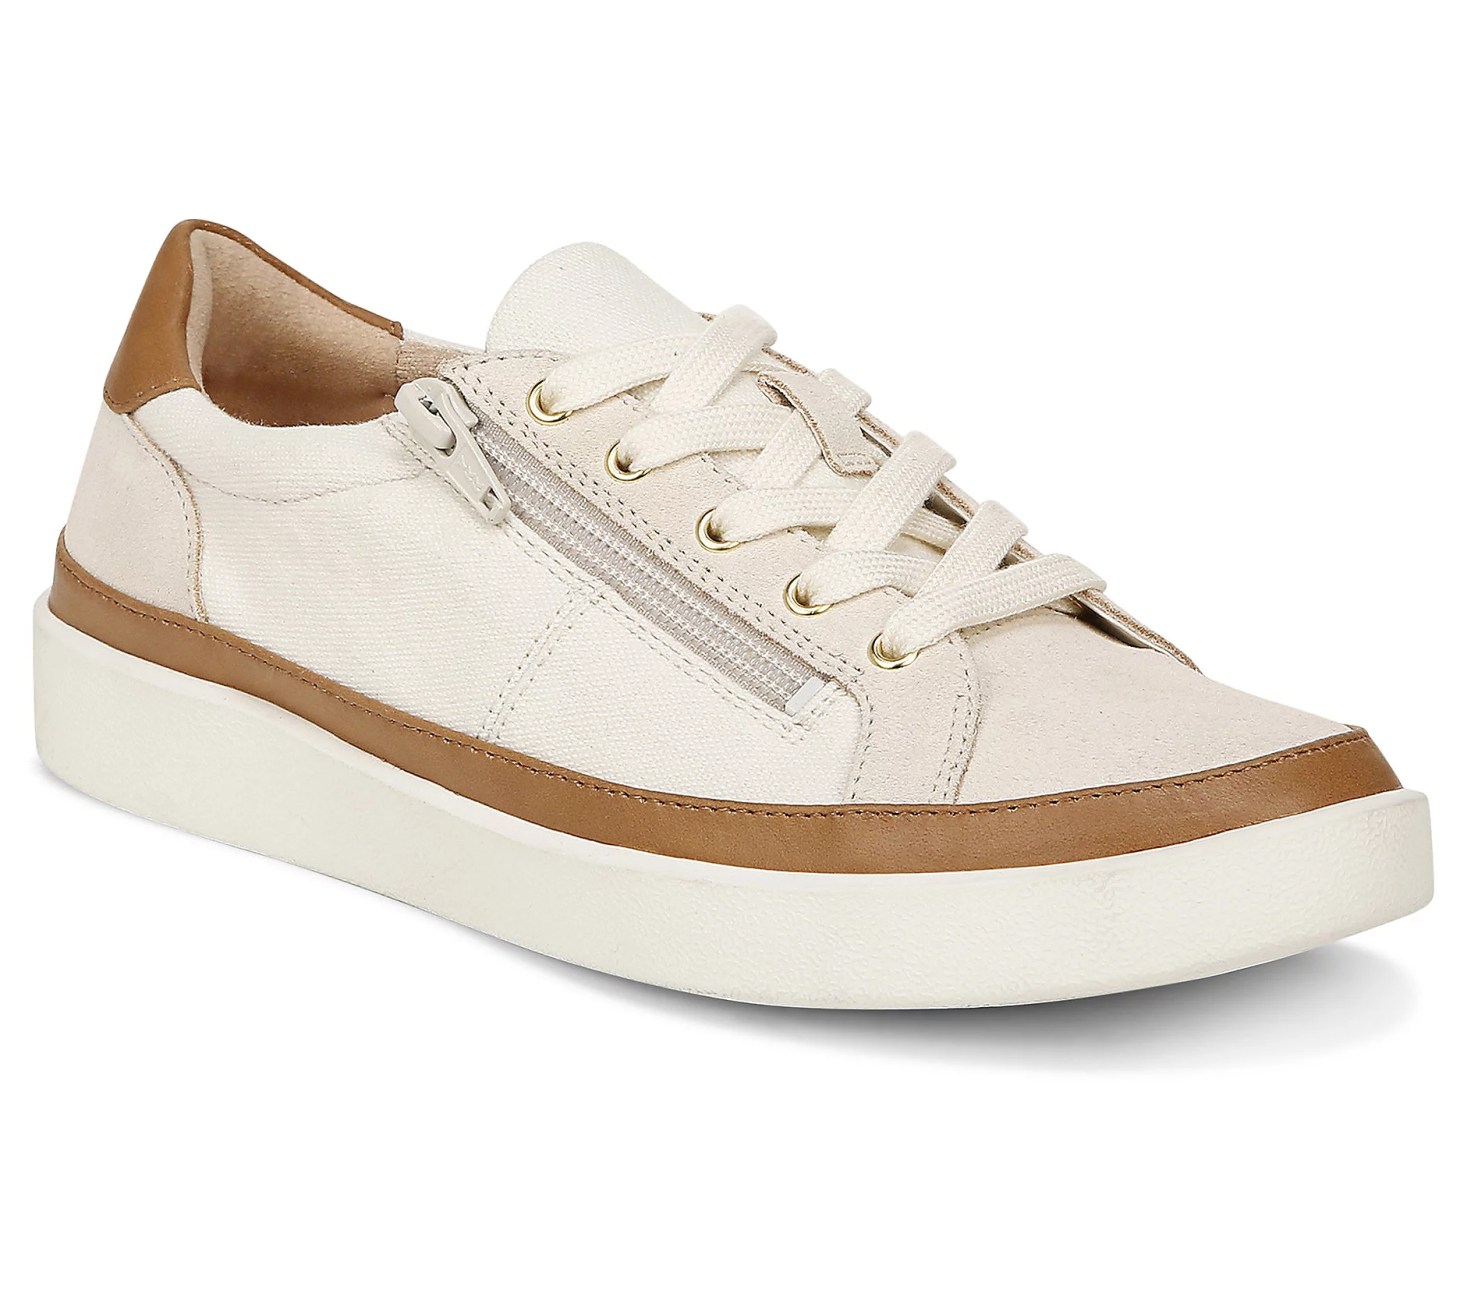 Vionic mayra sneakers, vionic shoes on sale